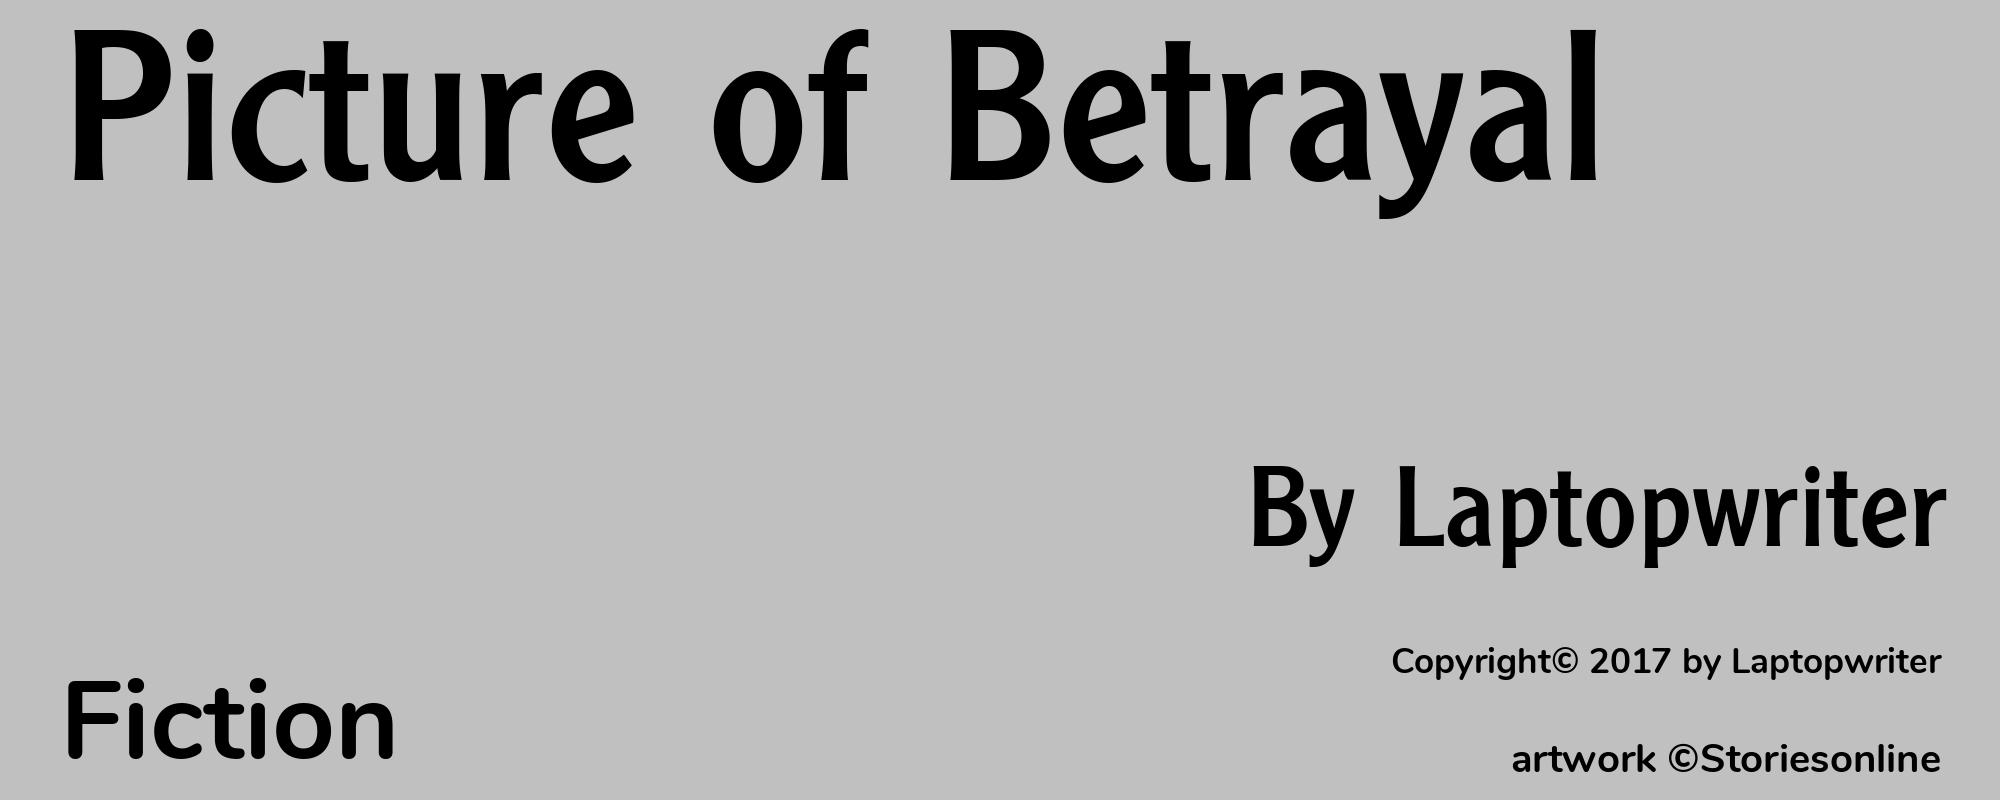 Picture of Betrayal - Cover